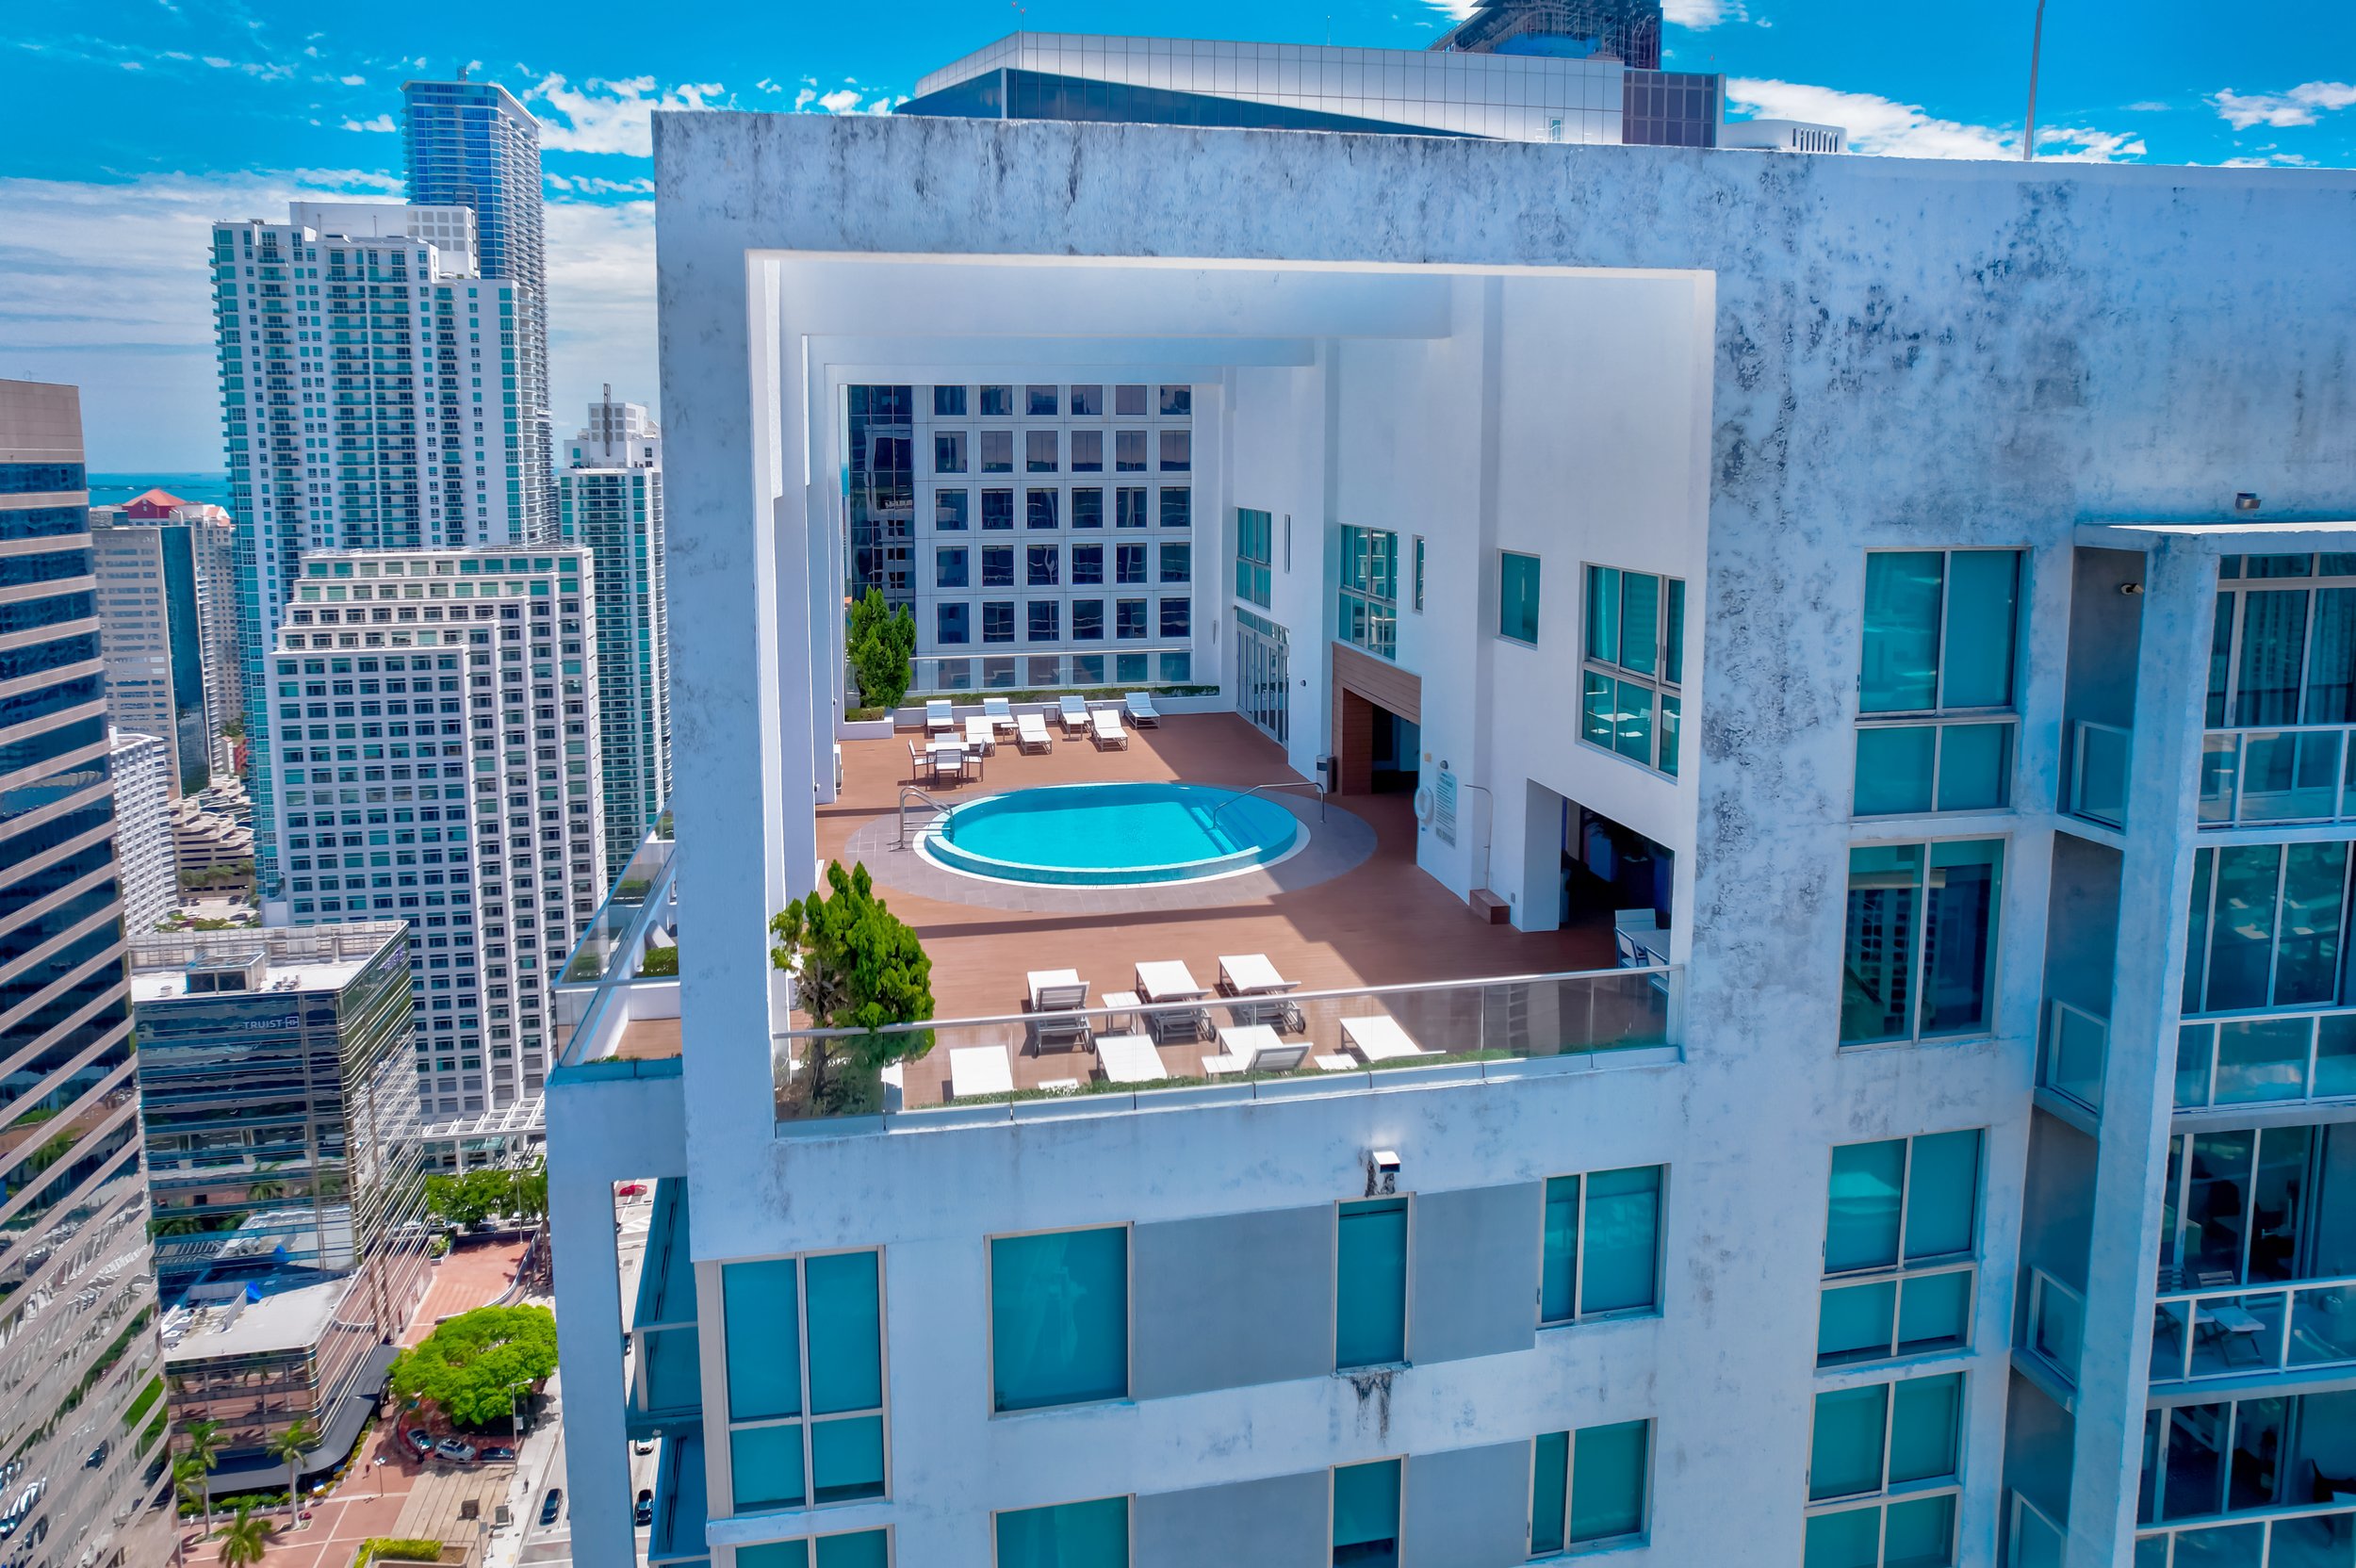 Check Out This Two-Bedroom Condo For Under $900K In Brickell 67.jpg